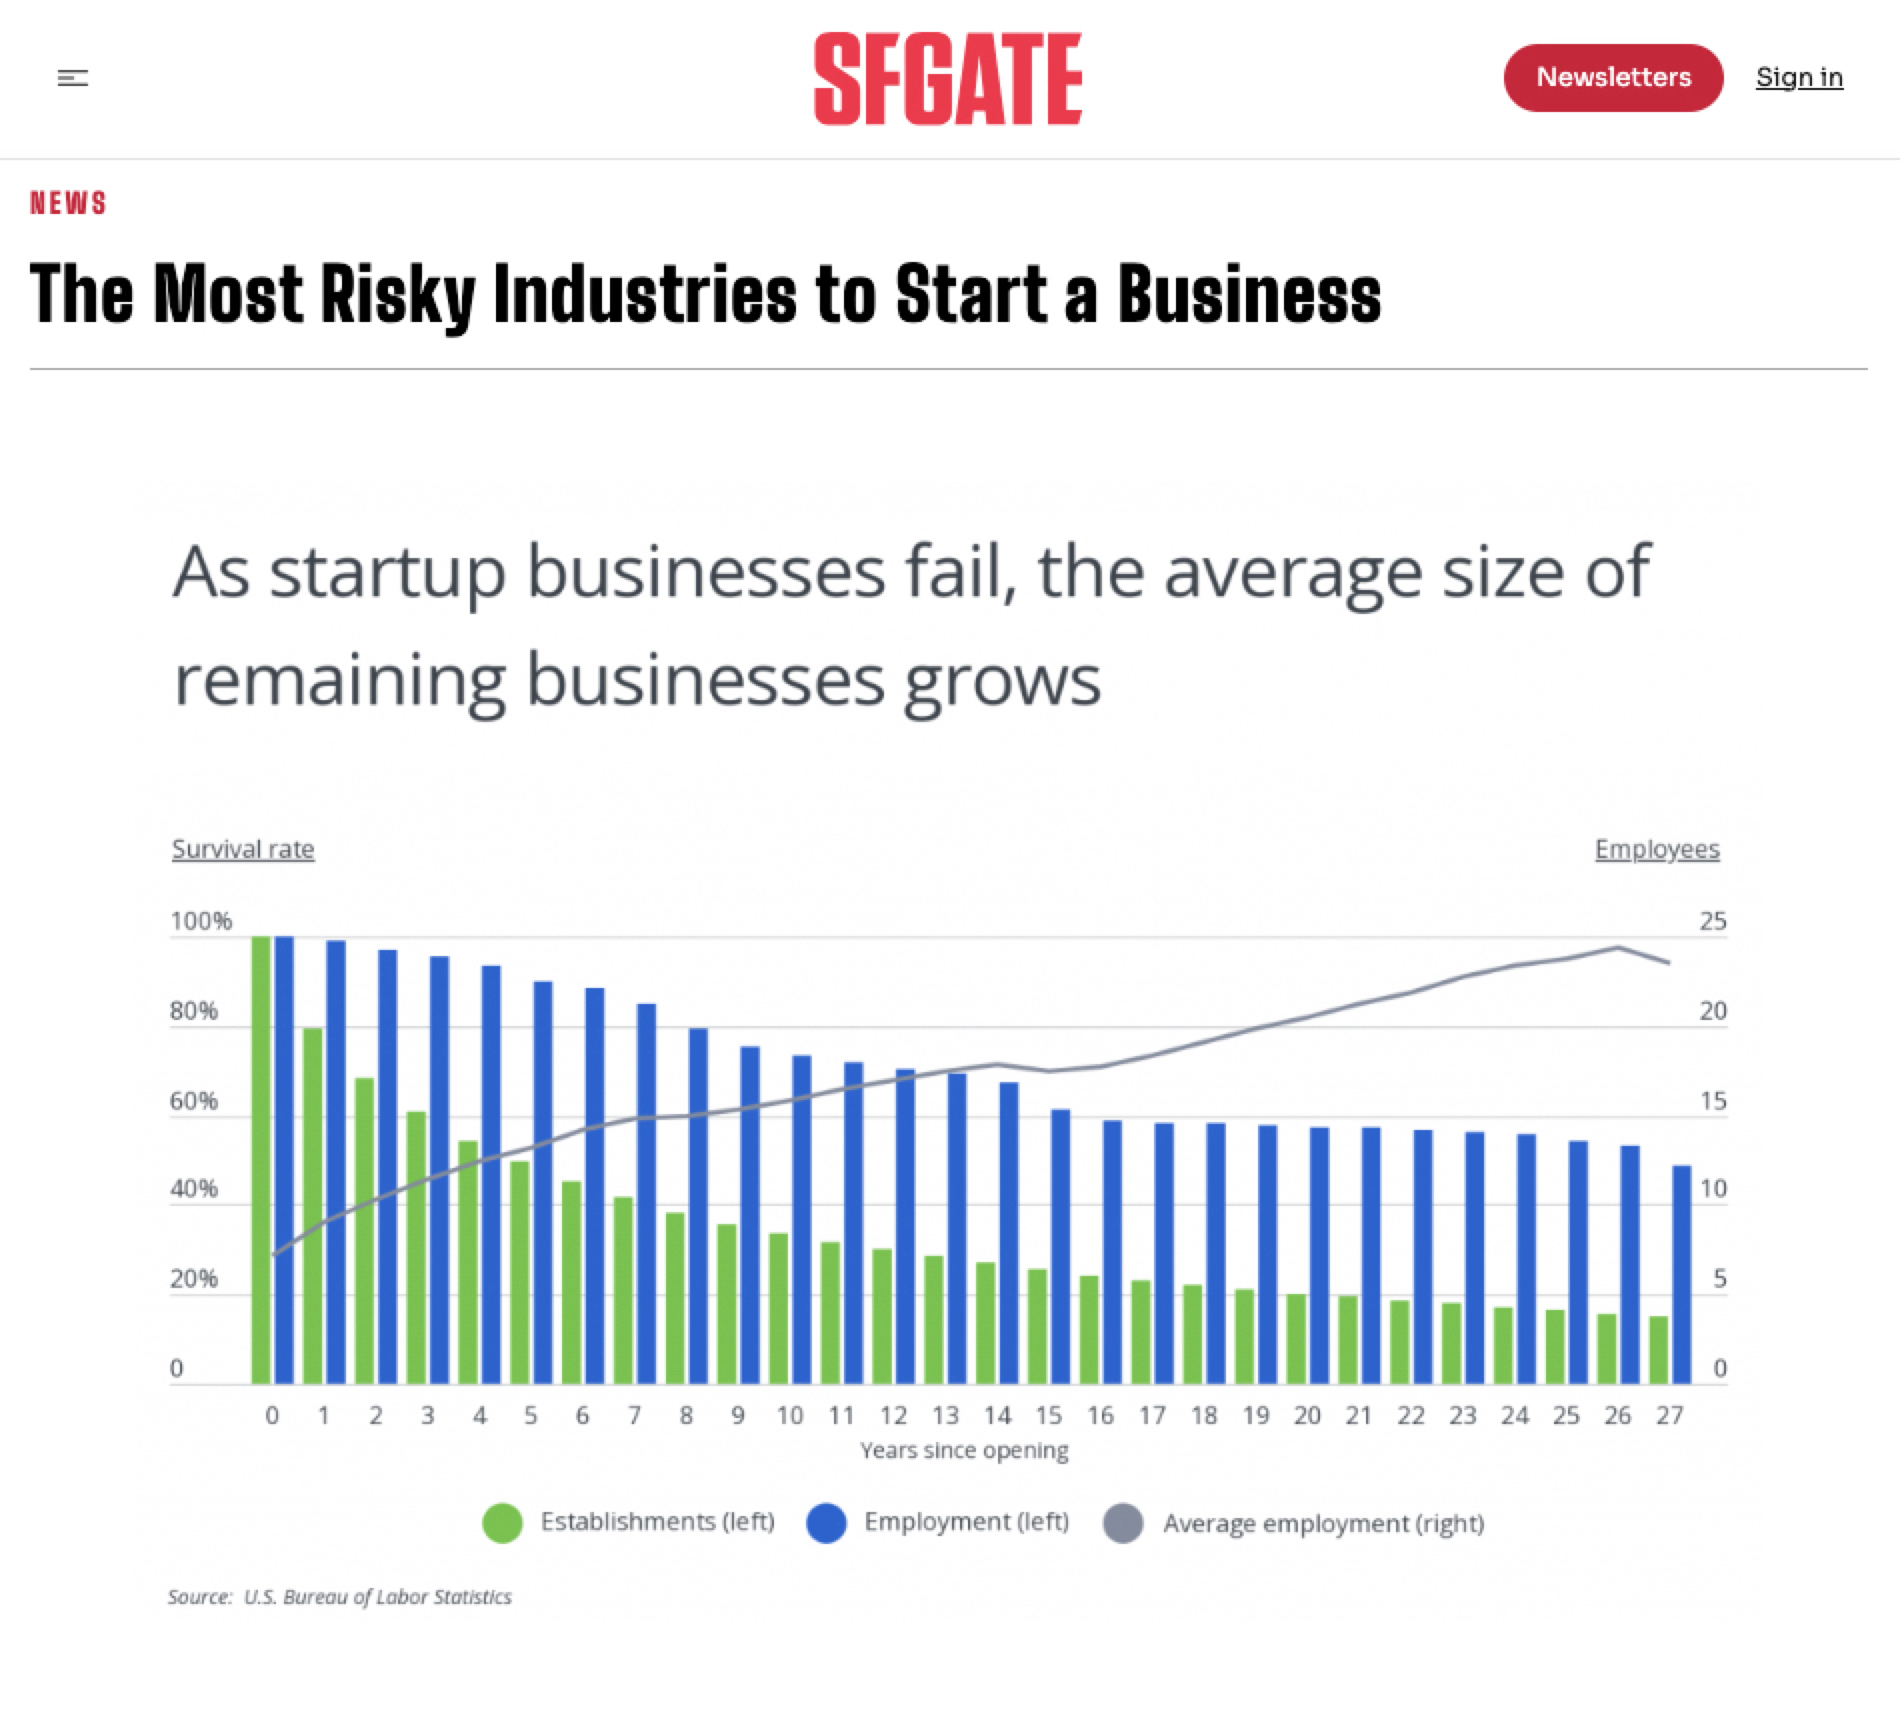 Risky Industries to Start a Business - SFGate